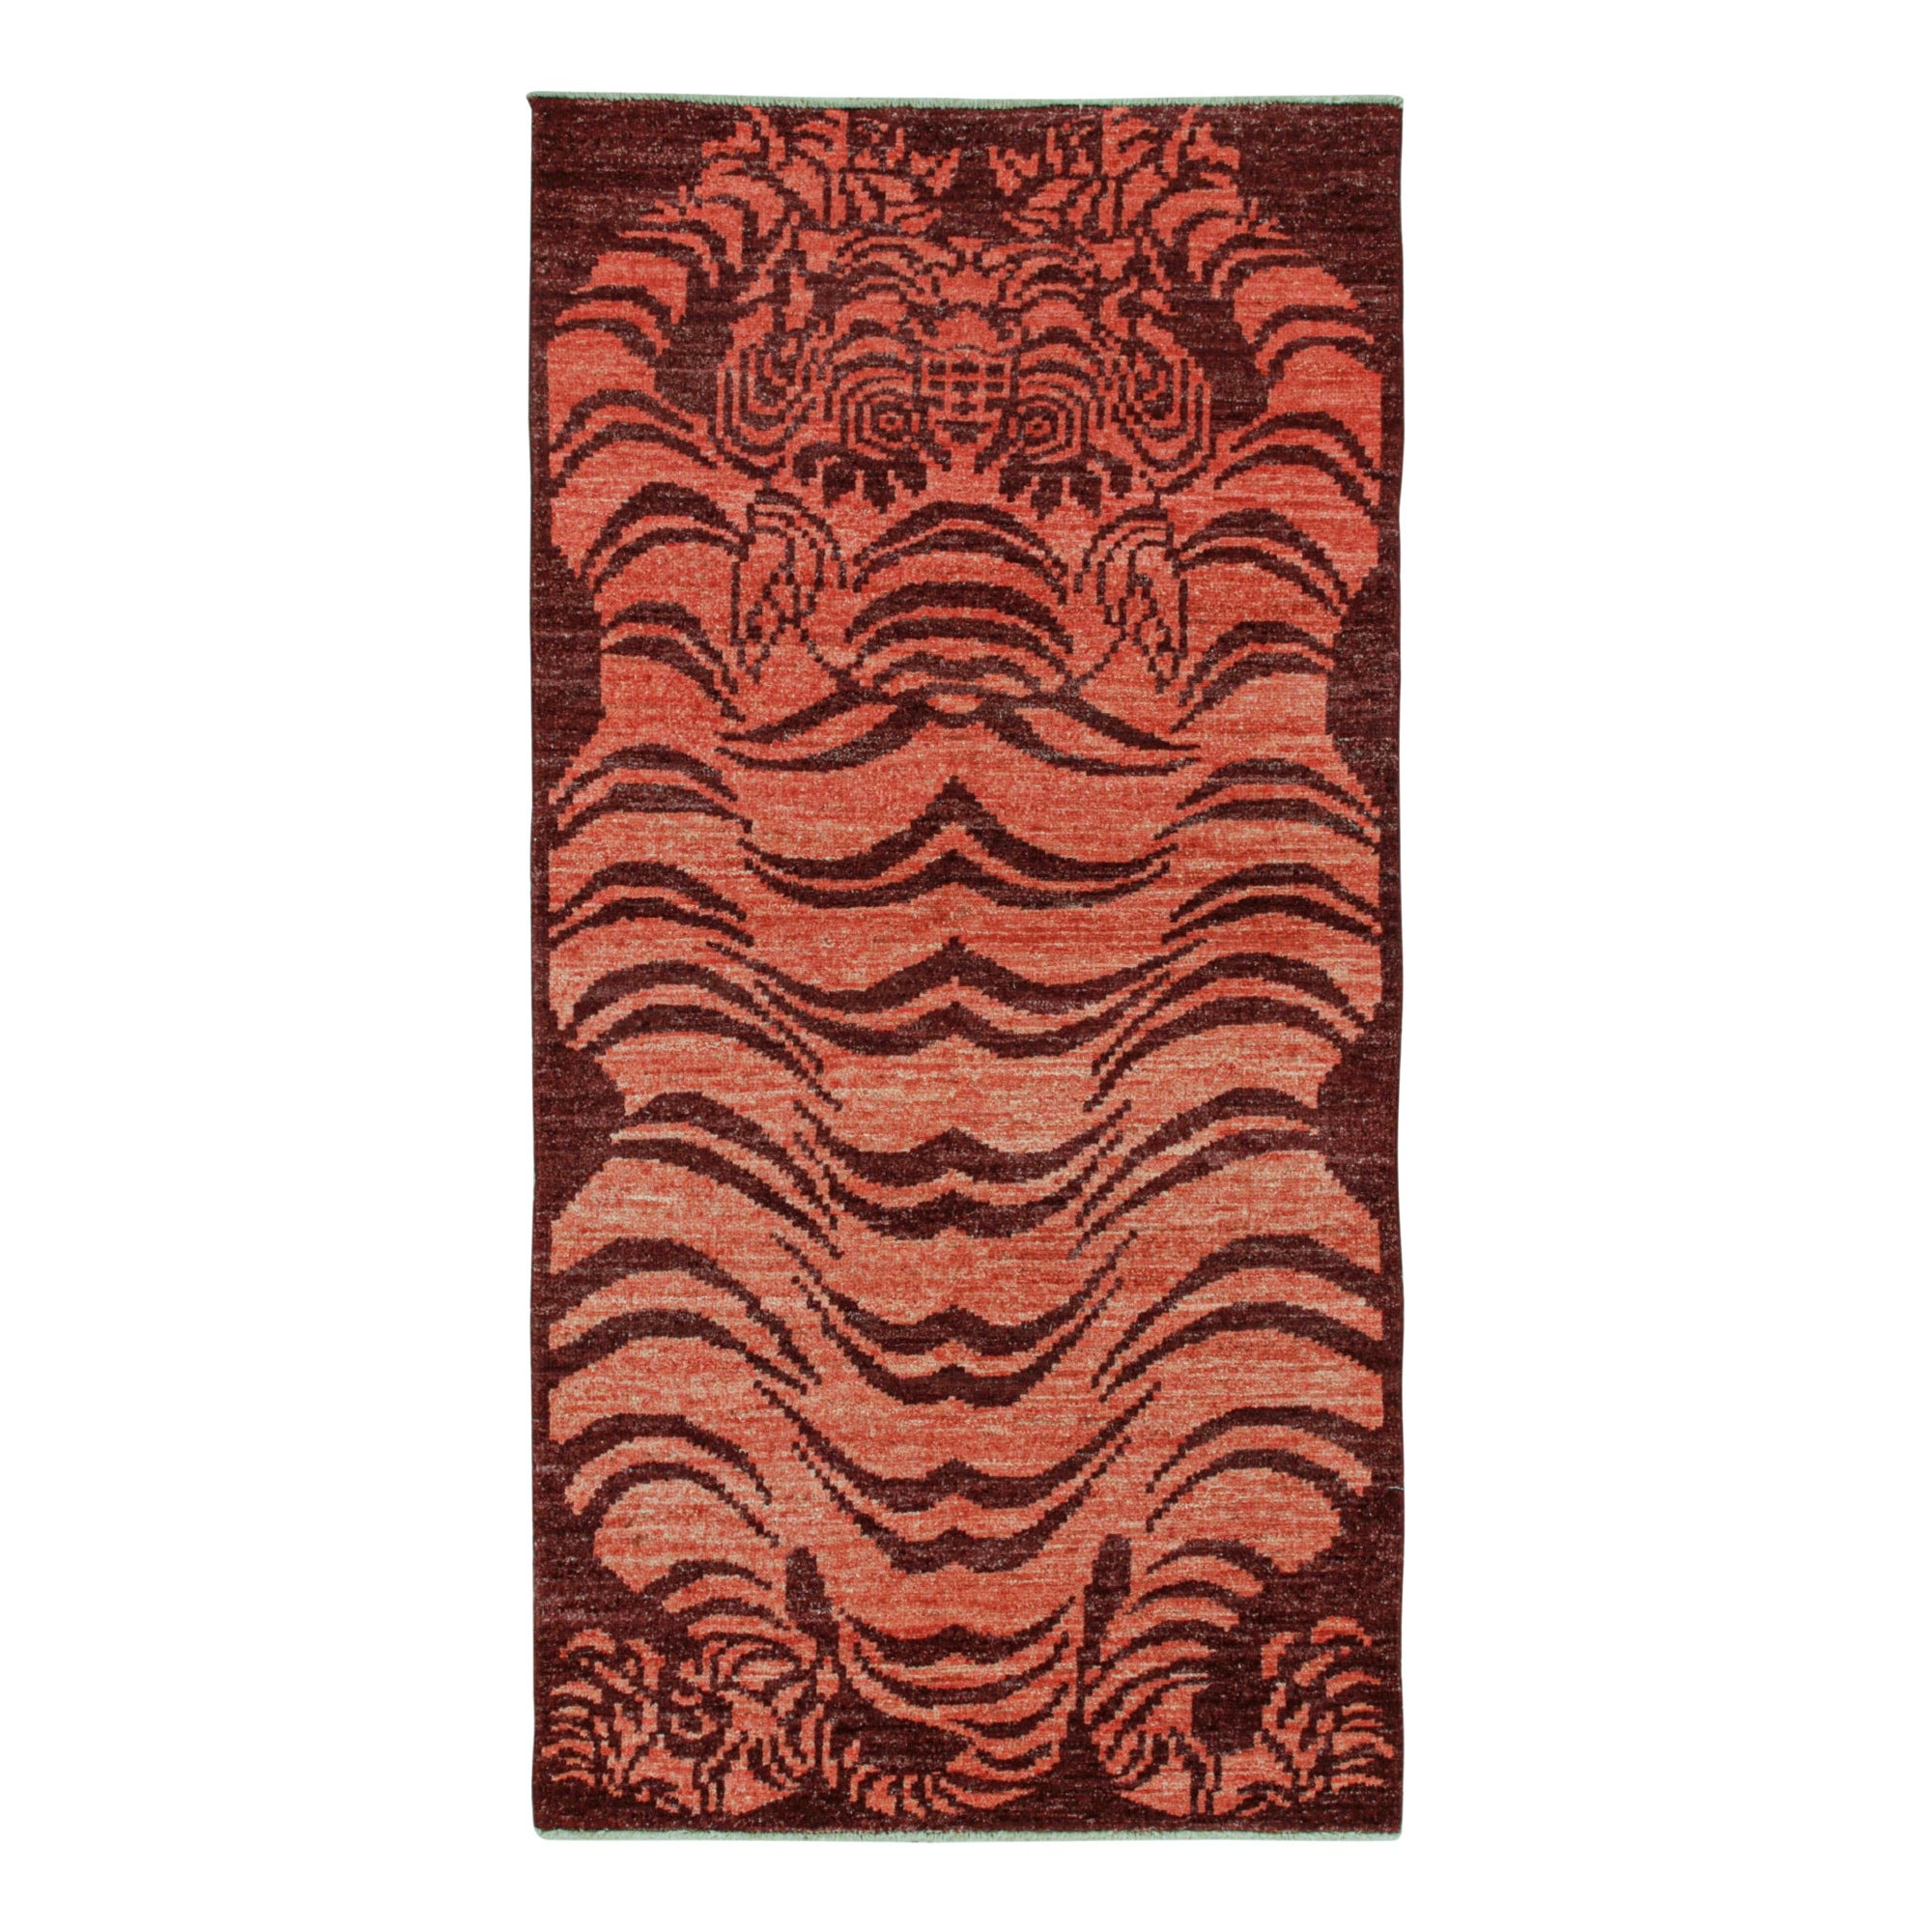 Tapis & Kilim's Classic Style Tiger Runner in Orange and Red Pictorial (en anglais) en vente